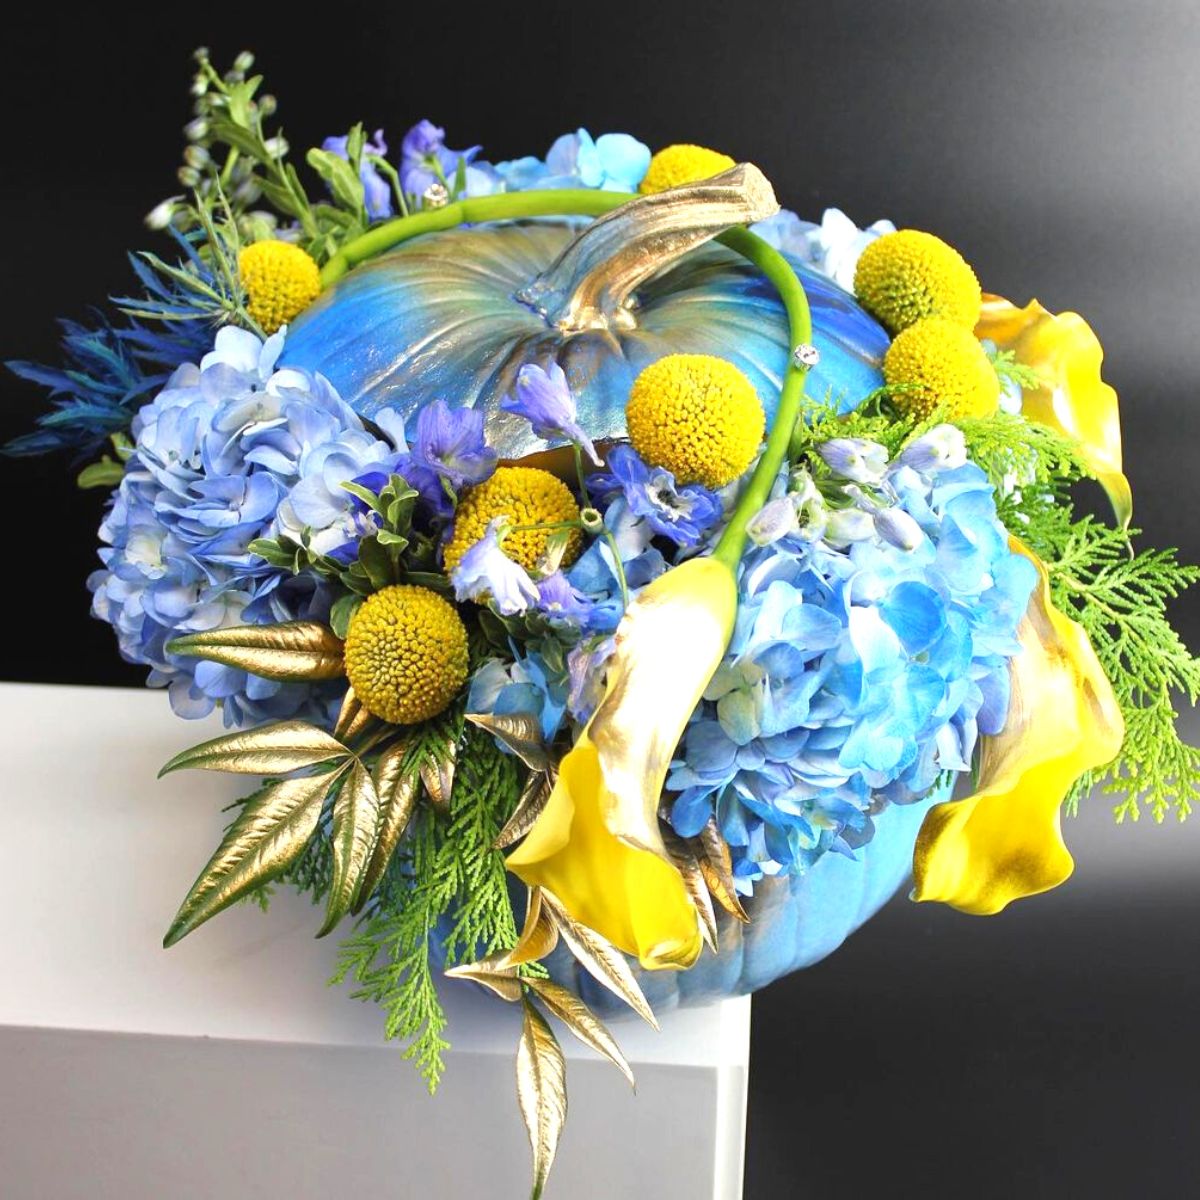 Some of Lea Romanowskis floral art